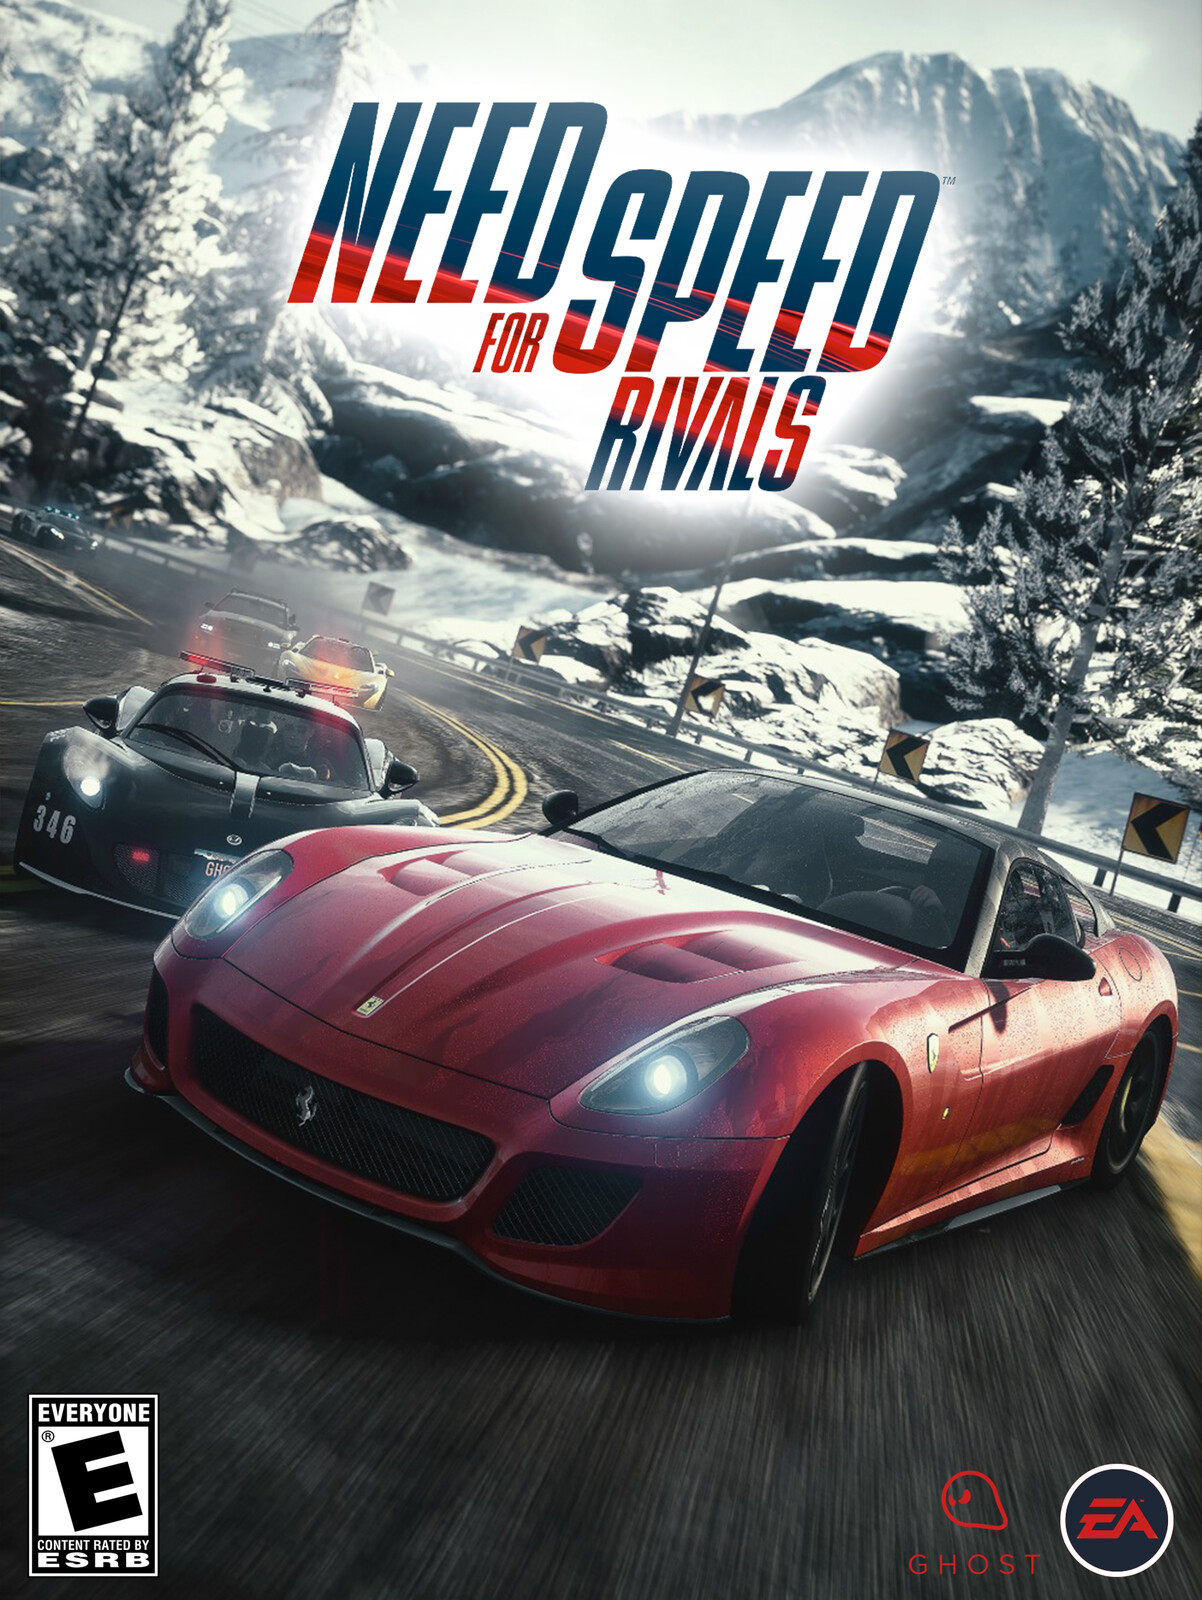 Need for Speed Rivals (Modification on the original cover).